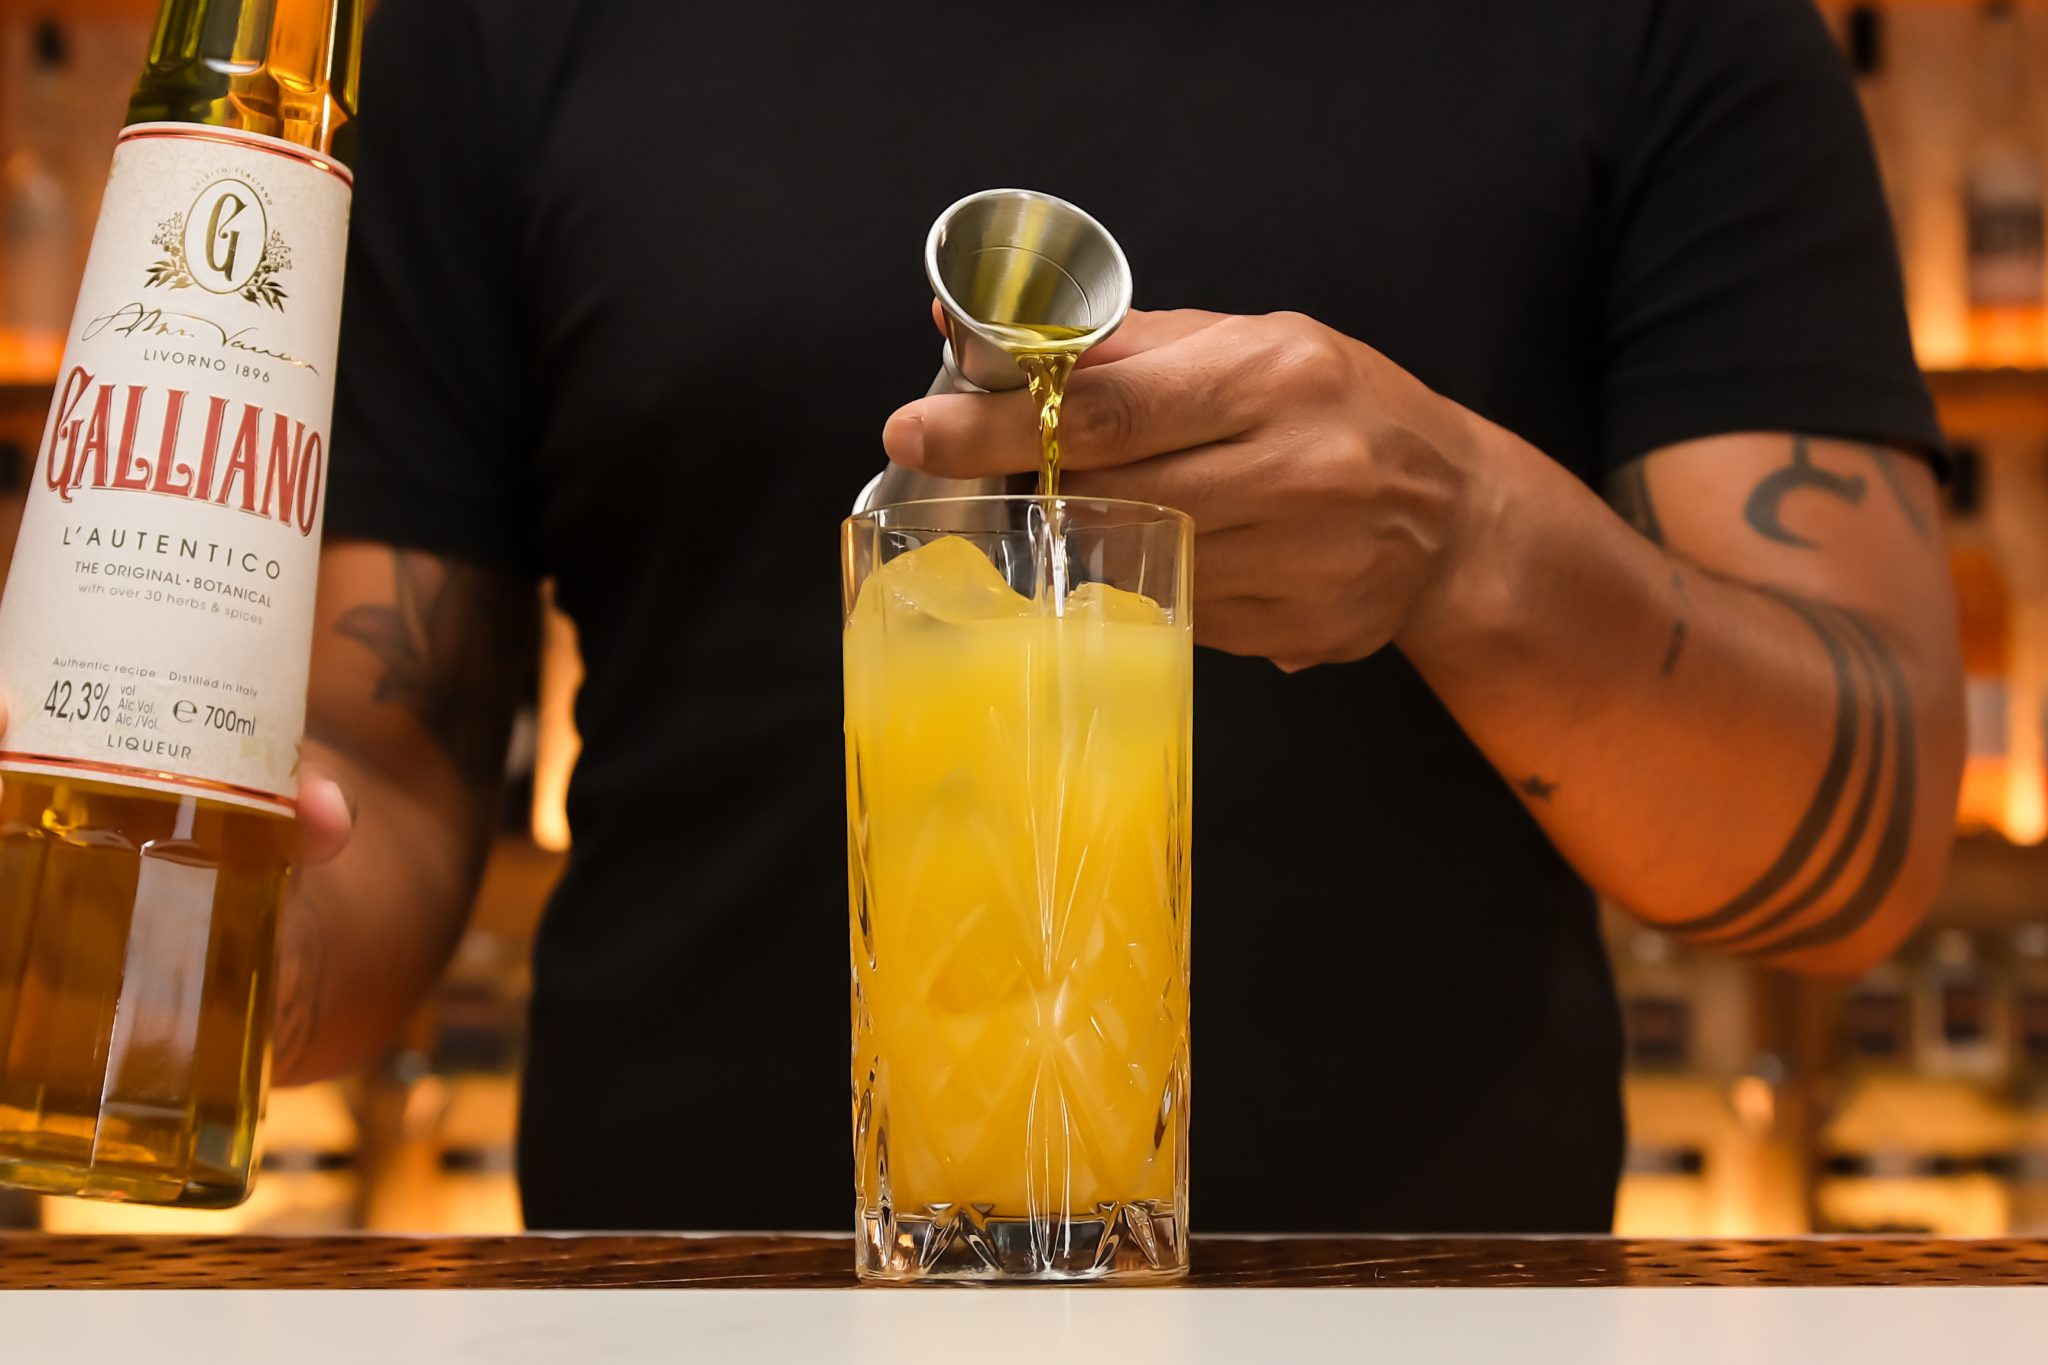 <p>Carefully float ½ oz of Galliano on top of the mixture, adding an herbal complexity to the drink.</p>
